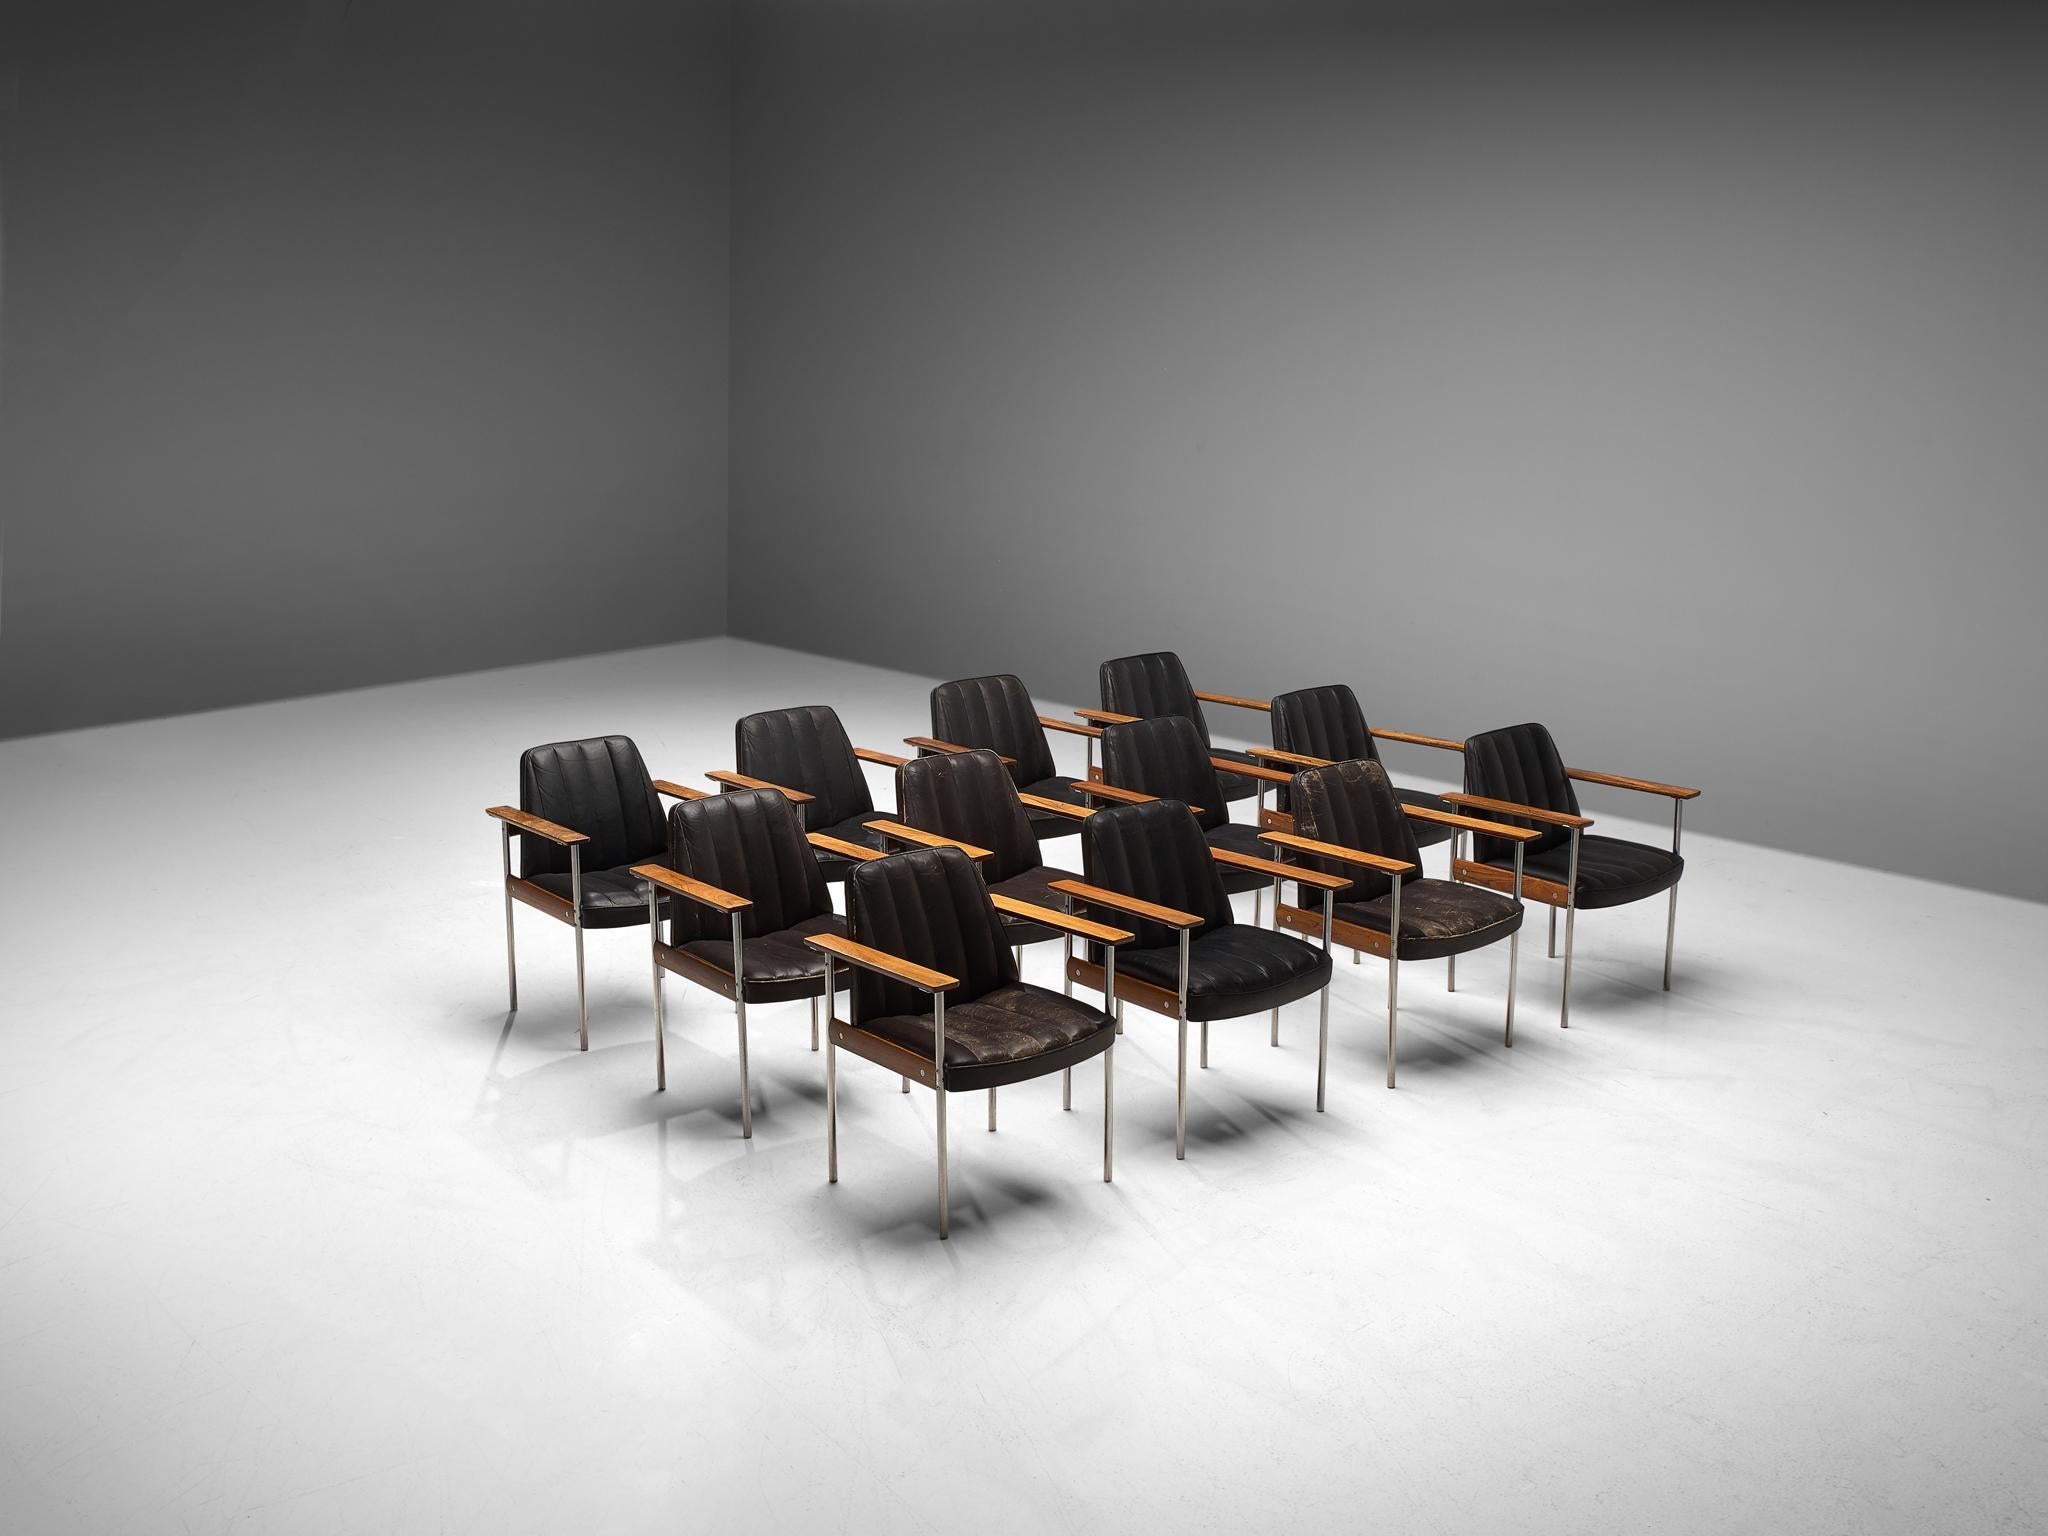 Sven Ivar Dysthe for Dokke Møbler, combined set of 24 dining chairs, black leather, steel, rosewood, Norway, circa 1959. 

These well-crafted office chairs are designed by Sven Ivar Dysthe. The base of these office chairs is made of rosewood with